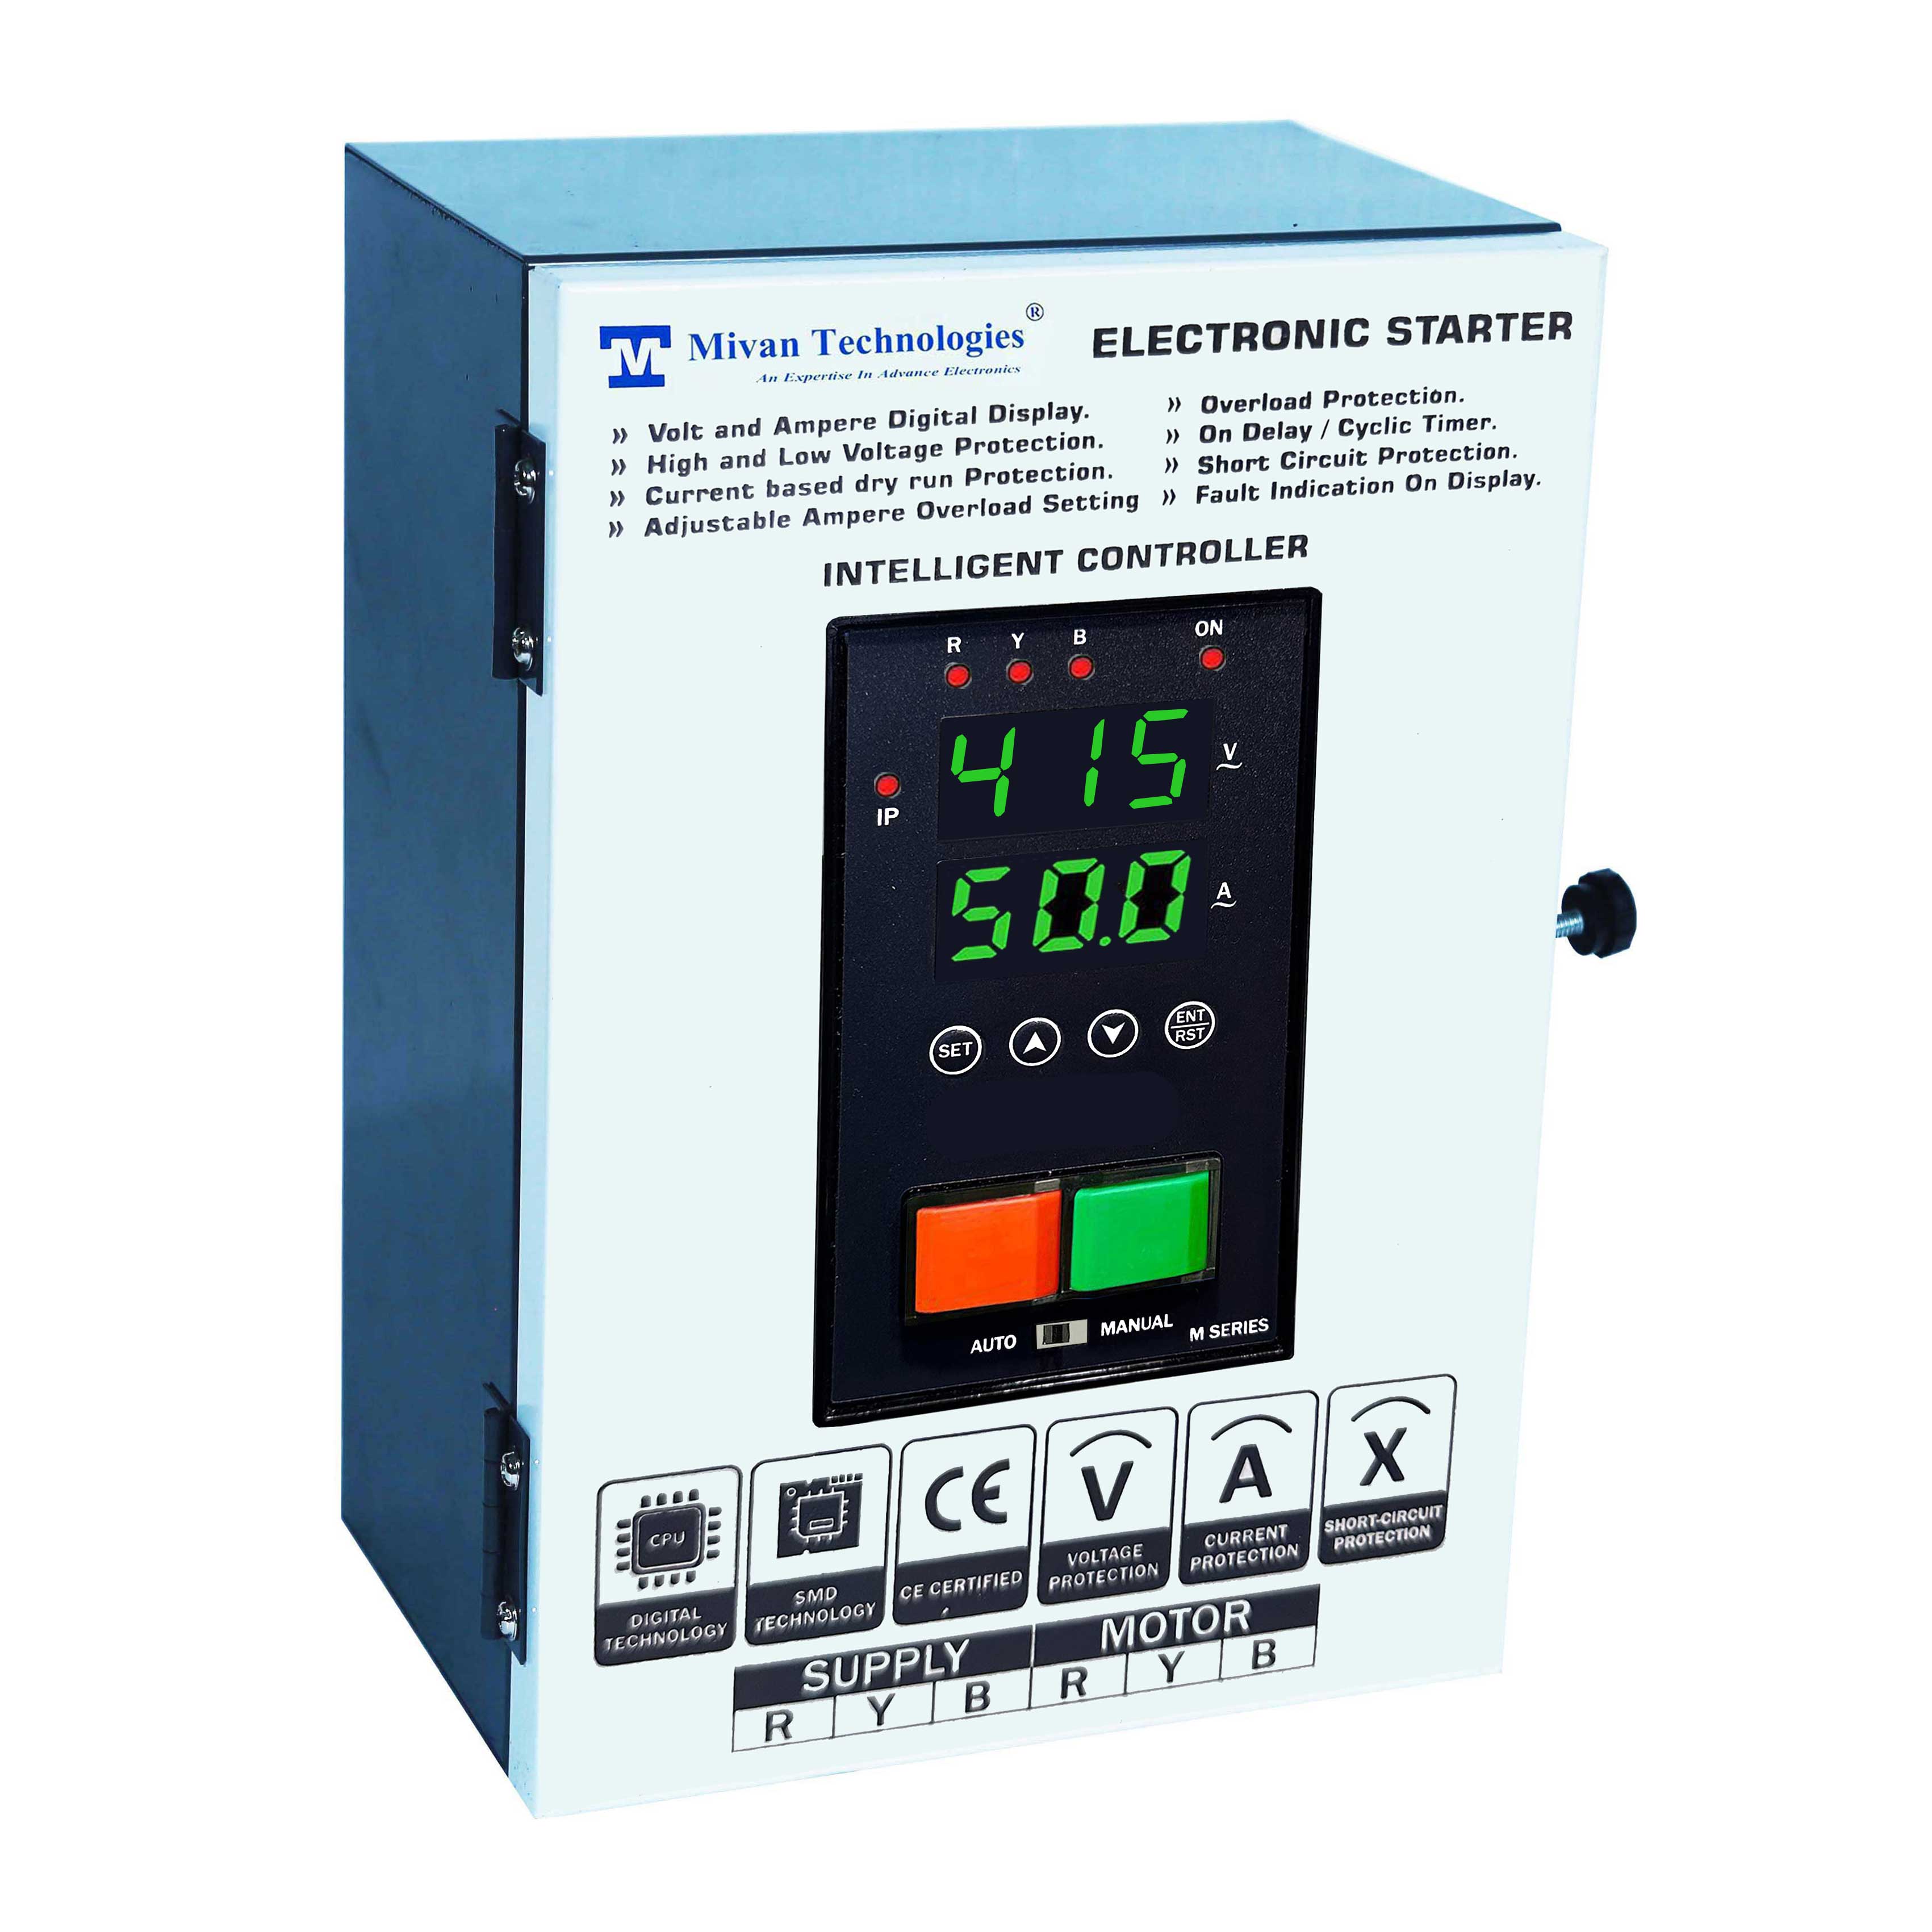 DP 301S Metal Enclosure 3 Phase DOL Digital Starter for 3 Phase Motor Suitable up to 10 hp Motor with HV LV OL Dry protections with SPP Auto switch and cyclic timer